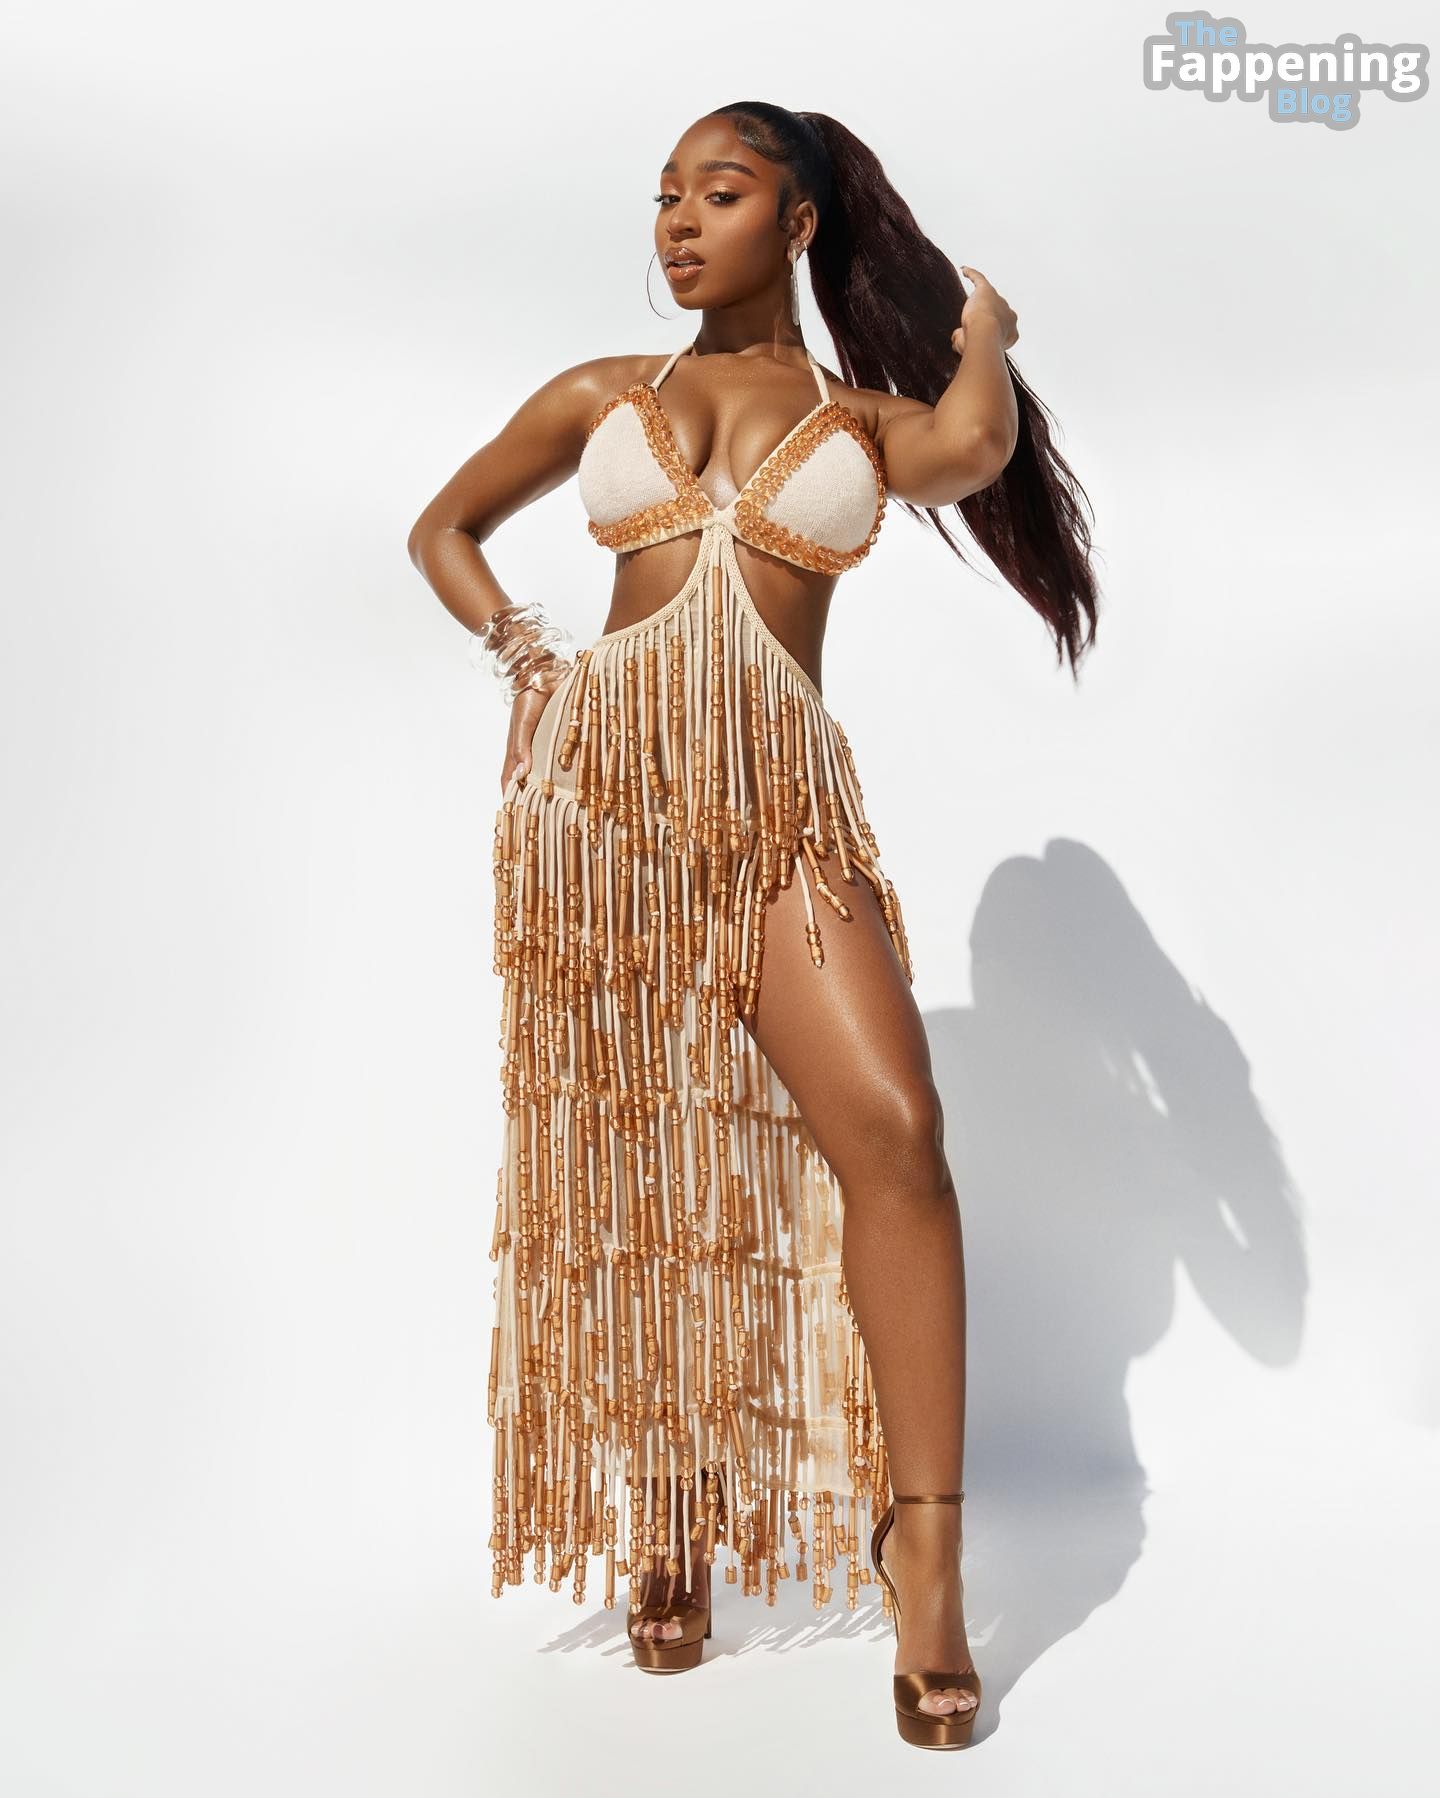 Normani-Sexy-The-Fappening-Blog-1.jpg